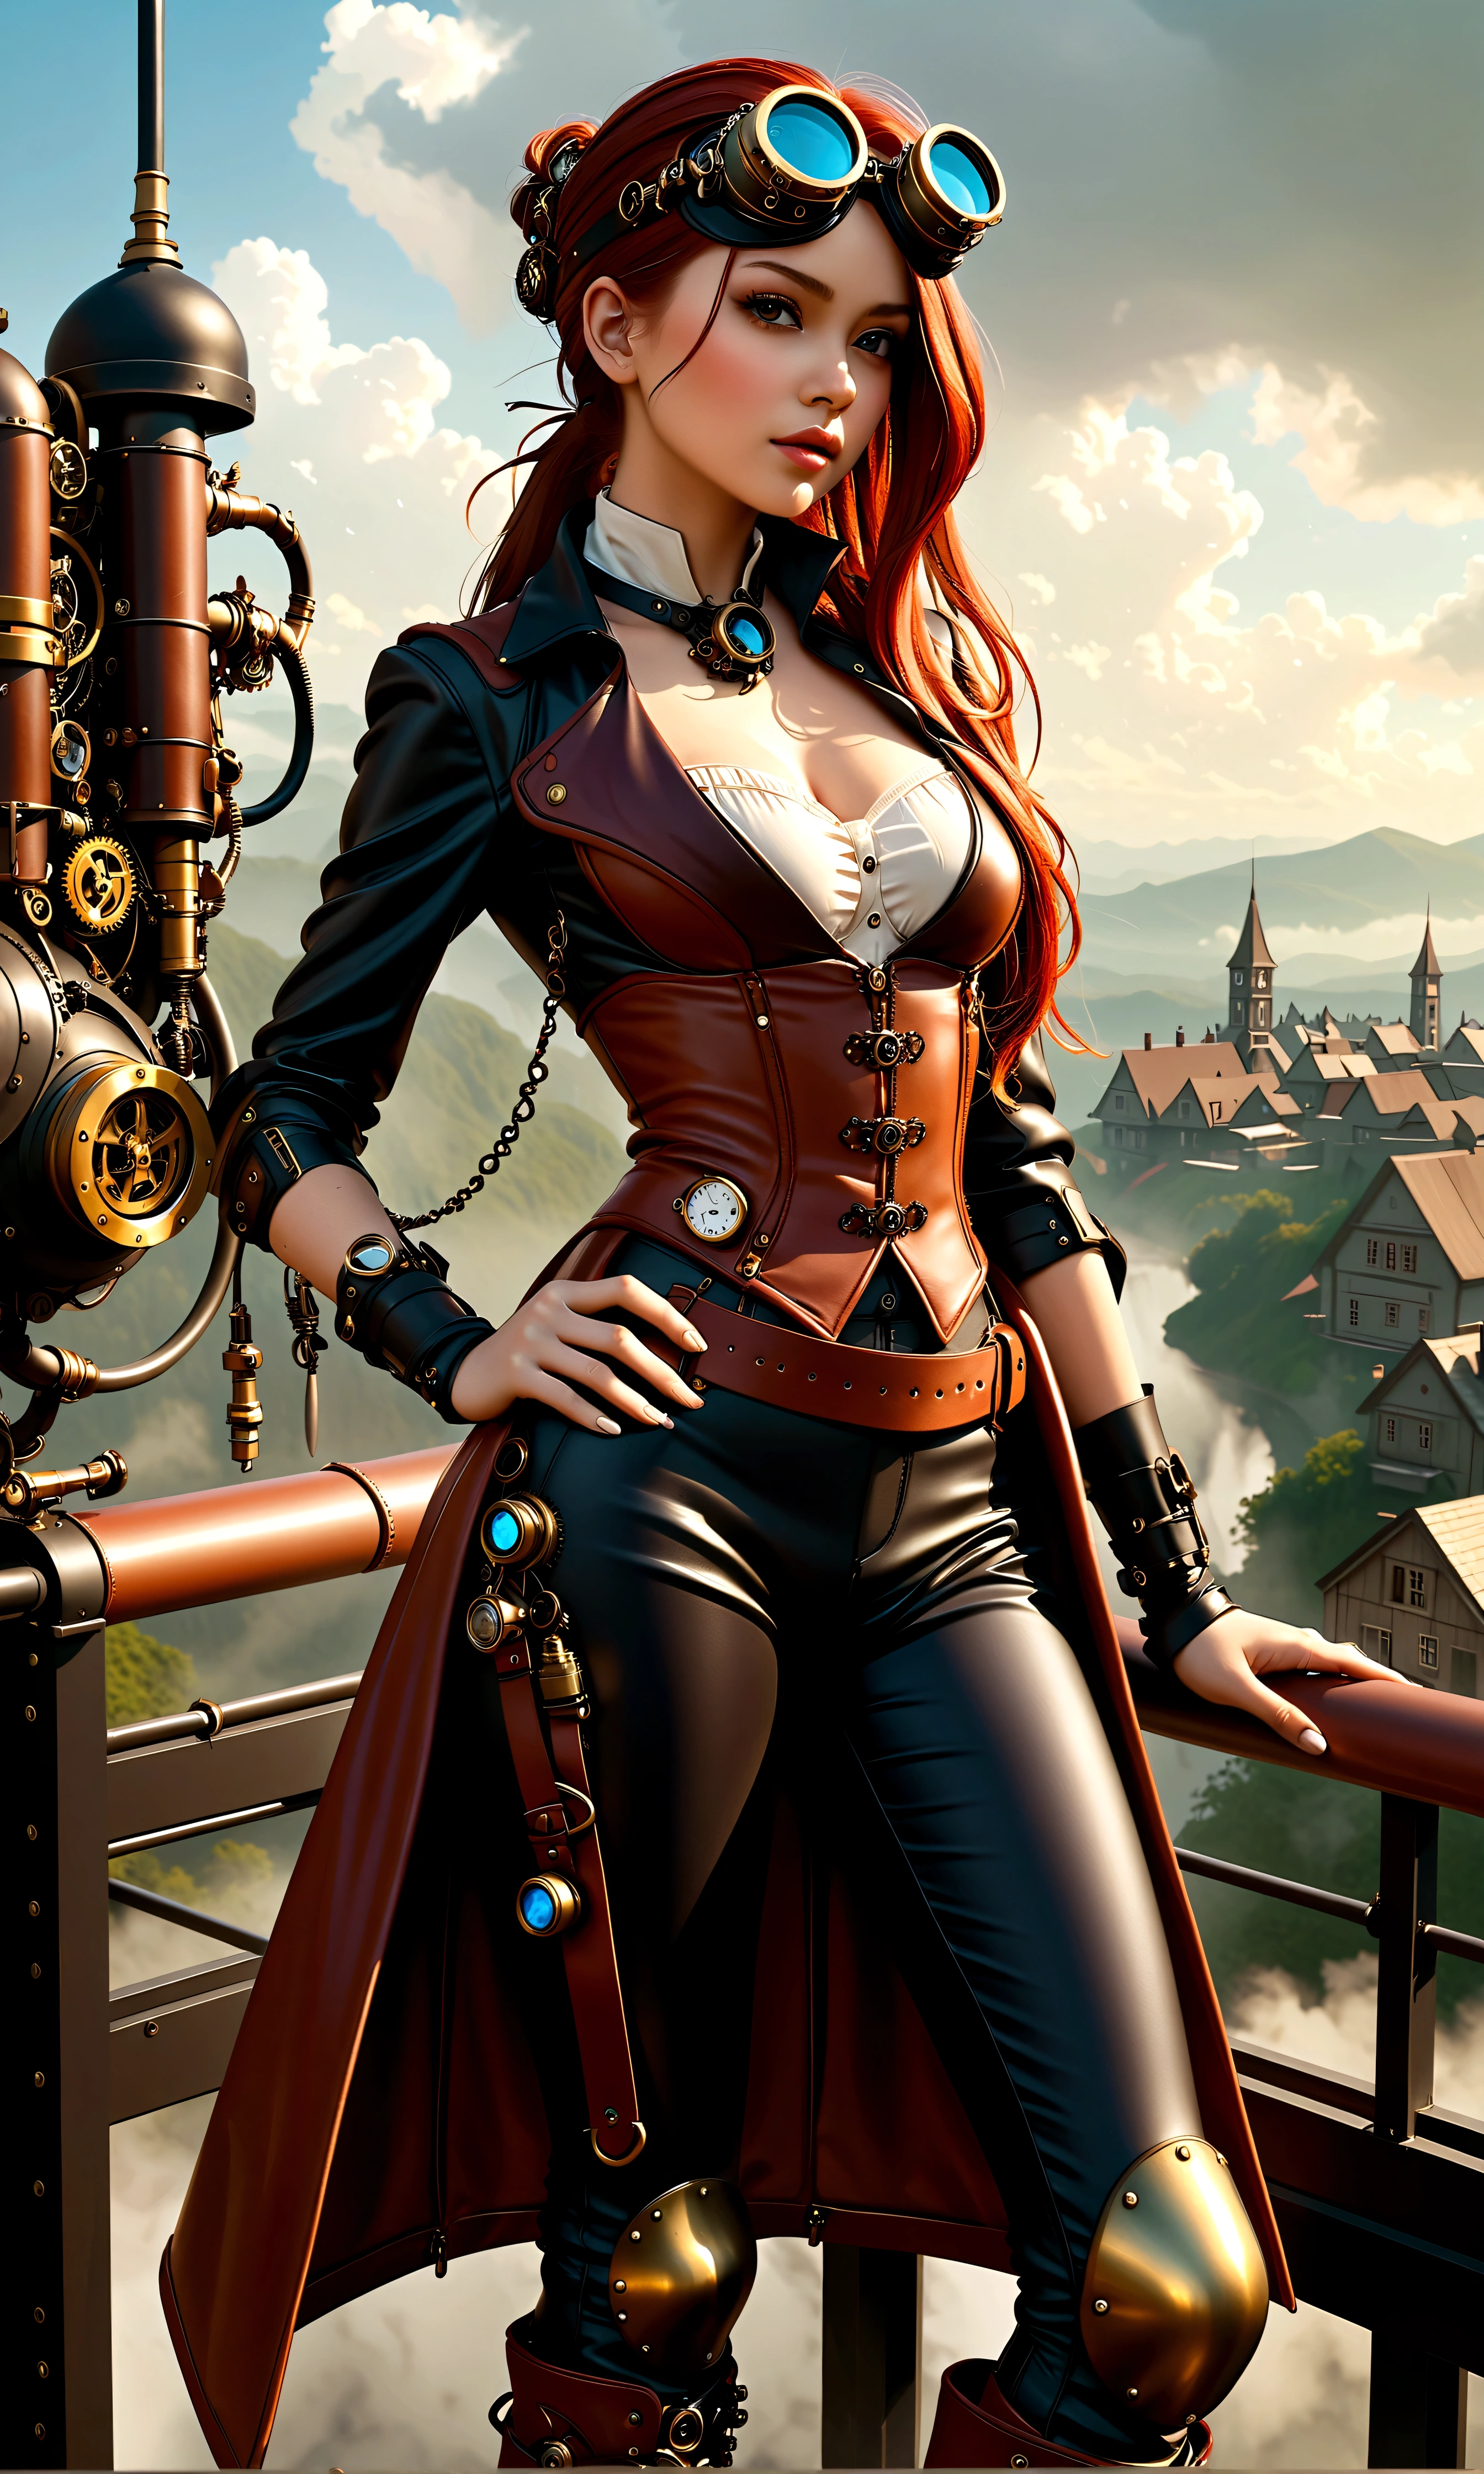 ganzkörper, ganzkörper bild(head to toe in frame)((Masterpiece)),mfbp1, (Best Quality), (Cinematic),(Extremely detailed CG Unity 8k wallpaper), 1 girl, fit,Delicious company, small breasts,(no goggles on face)(very long redhair),one Stunning red-haired steampunk woman who lost her forearm in an accident received a beautifully designed, fine and perfectly fitting robotic prosthesis (steampunk style) as a replacement, posing coolly in front of machines and factories. With this prosthesis she shows us a sealed, delicate poison glass bottle with blue liquid in it. Hand-forearm prosthesis made of brass and leather. She wears tight-fitting clothing (steampunk leather suit with cut-outs on hips and belly and buckles).the forearms are nude to show the prothetic arm, hoes and decorative wielding goggles in her hair on head, also made of brass and leather. The landscape is a bit gloomy, but also impressive.,1 line drawing,make up,steampunk style 